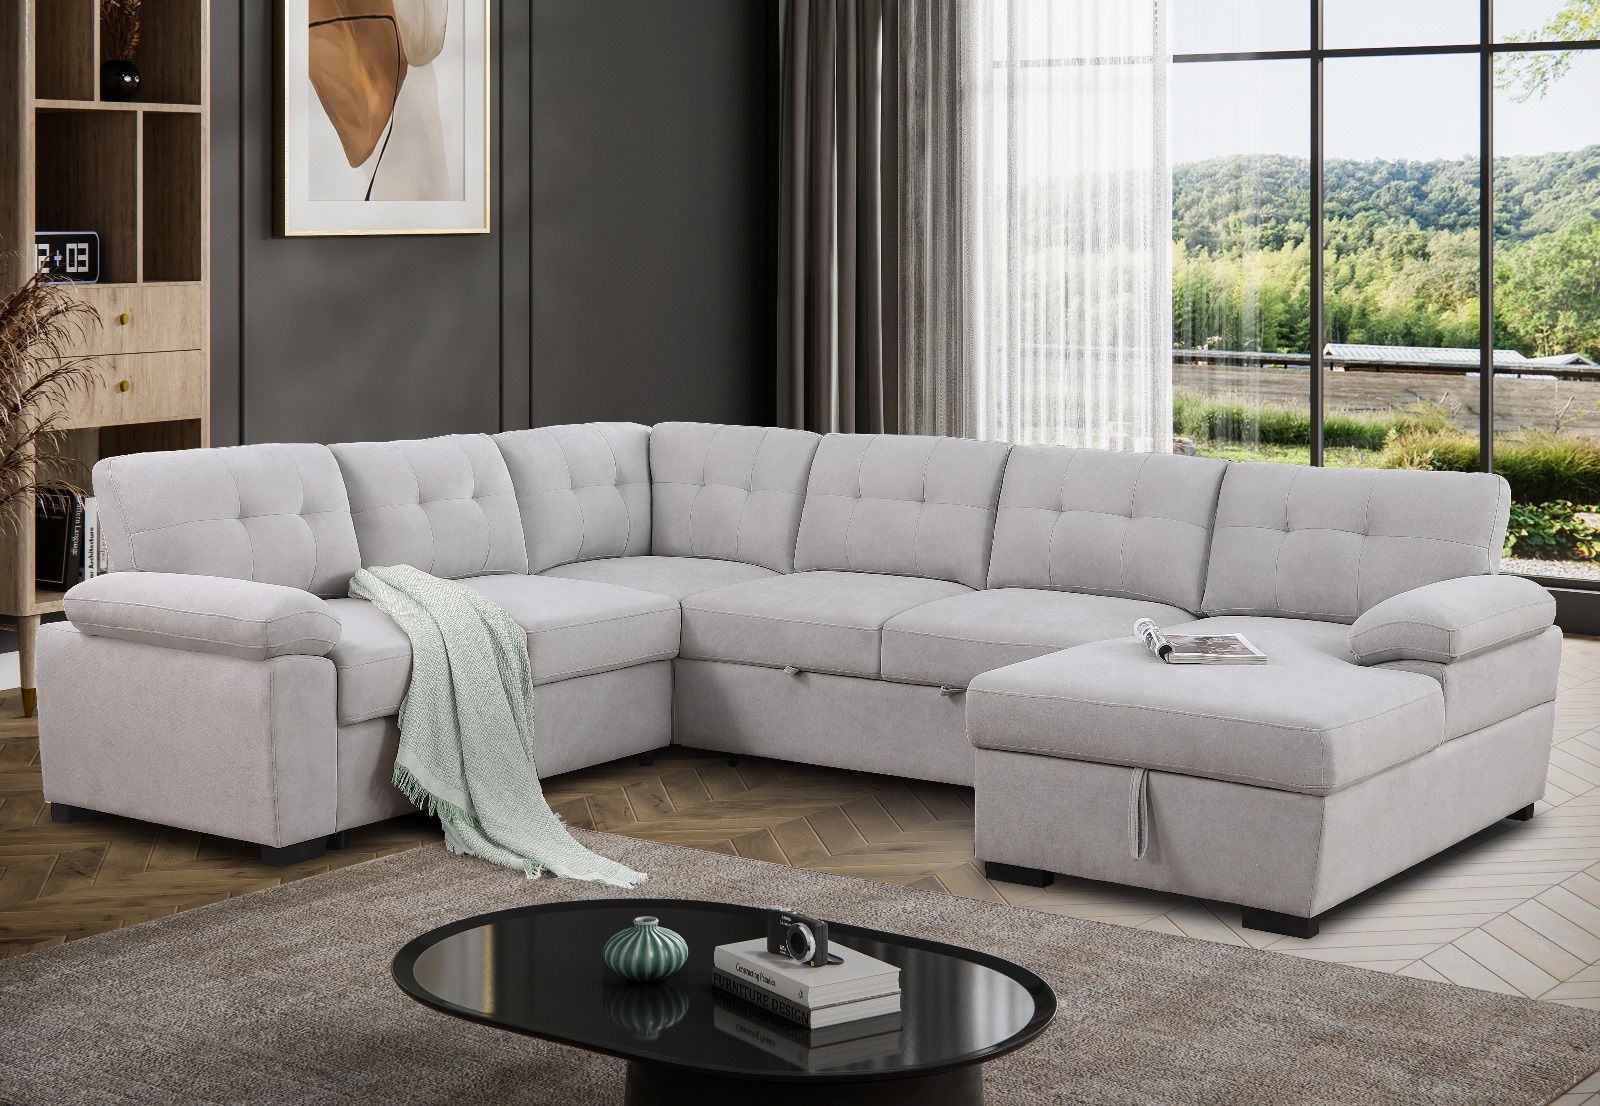 New! Large Sectional Sofa With Pull Out Bed, Sofa Bed, Sectional Sofa, Sectional Couch, Sectional, Sectionals, Couch, Sofa Bed With Storage Chaise